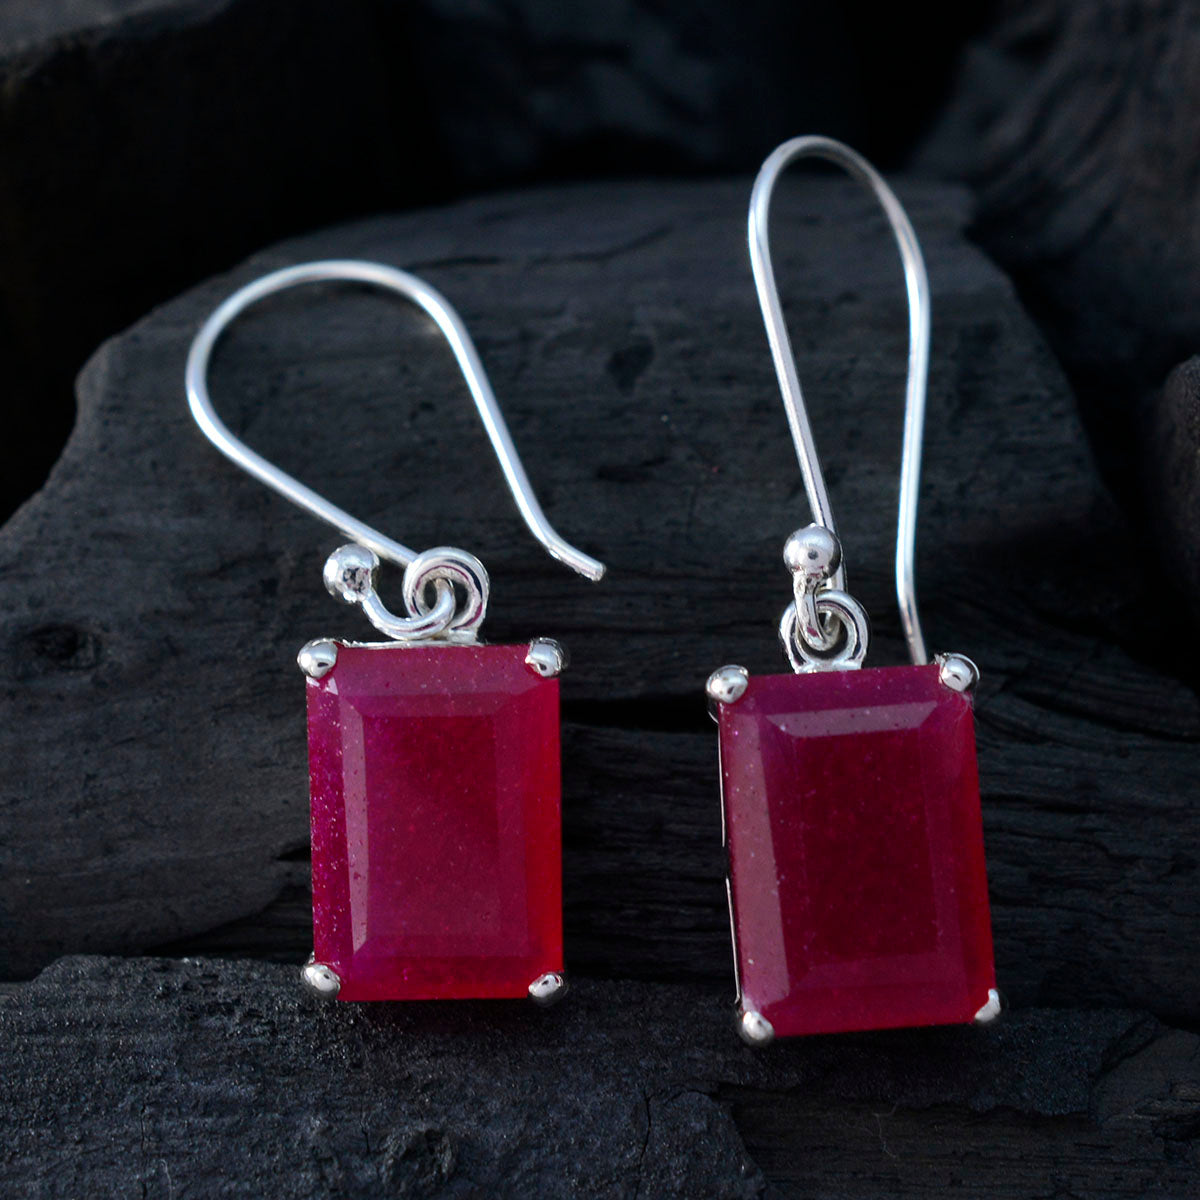 Riyo Real Gemstones Octogon Faceted Red Indian Ruby Silver Earrings cyber Monday gift